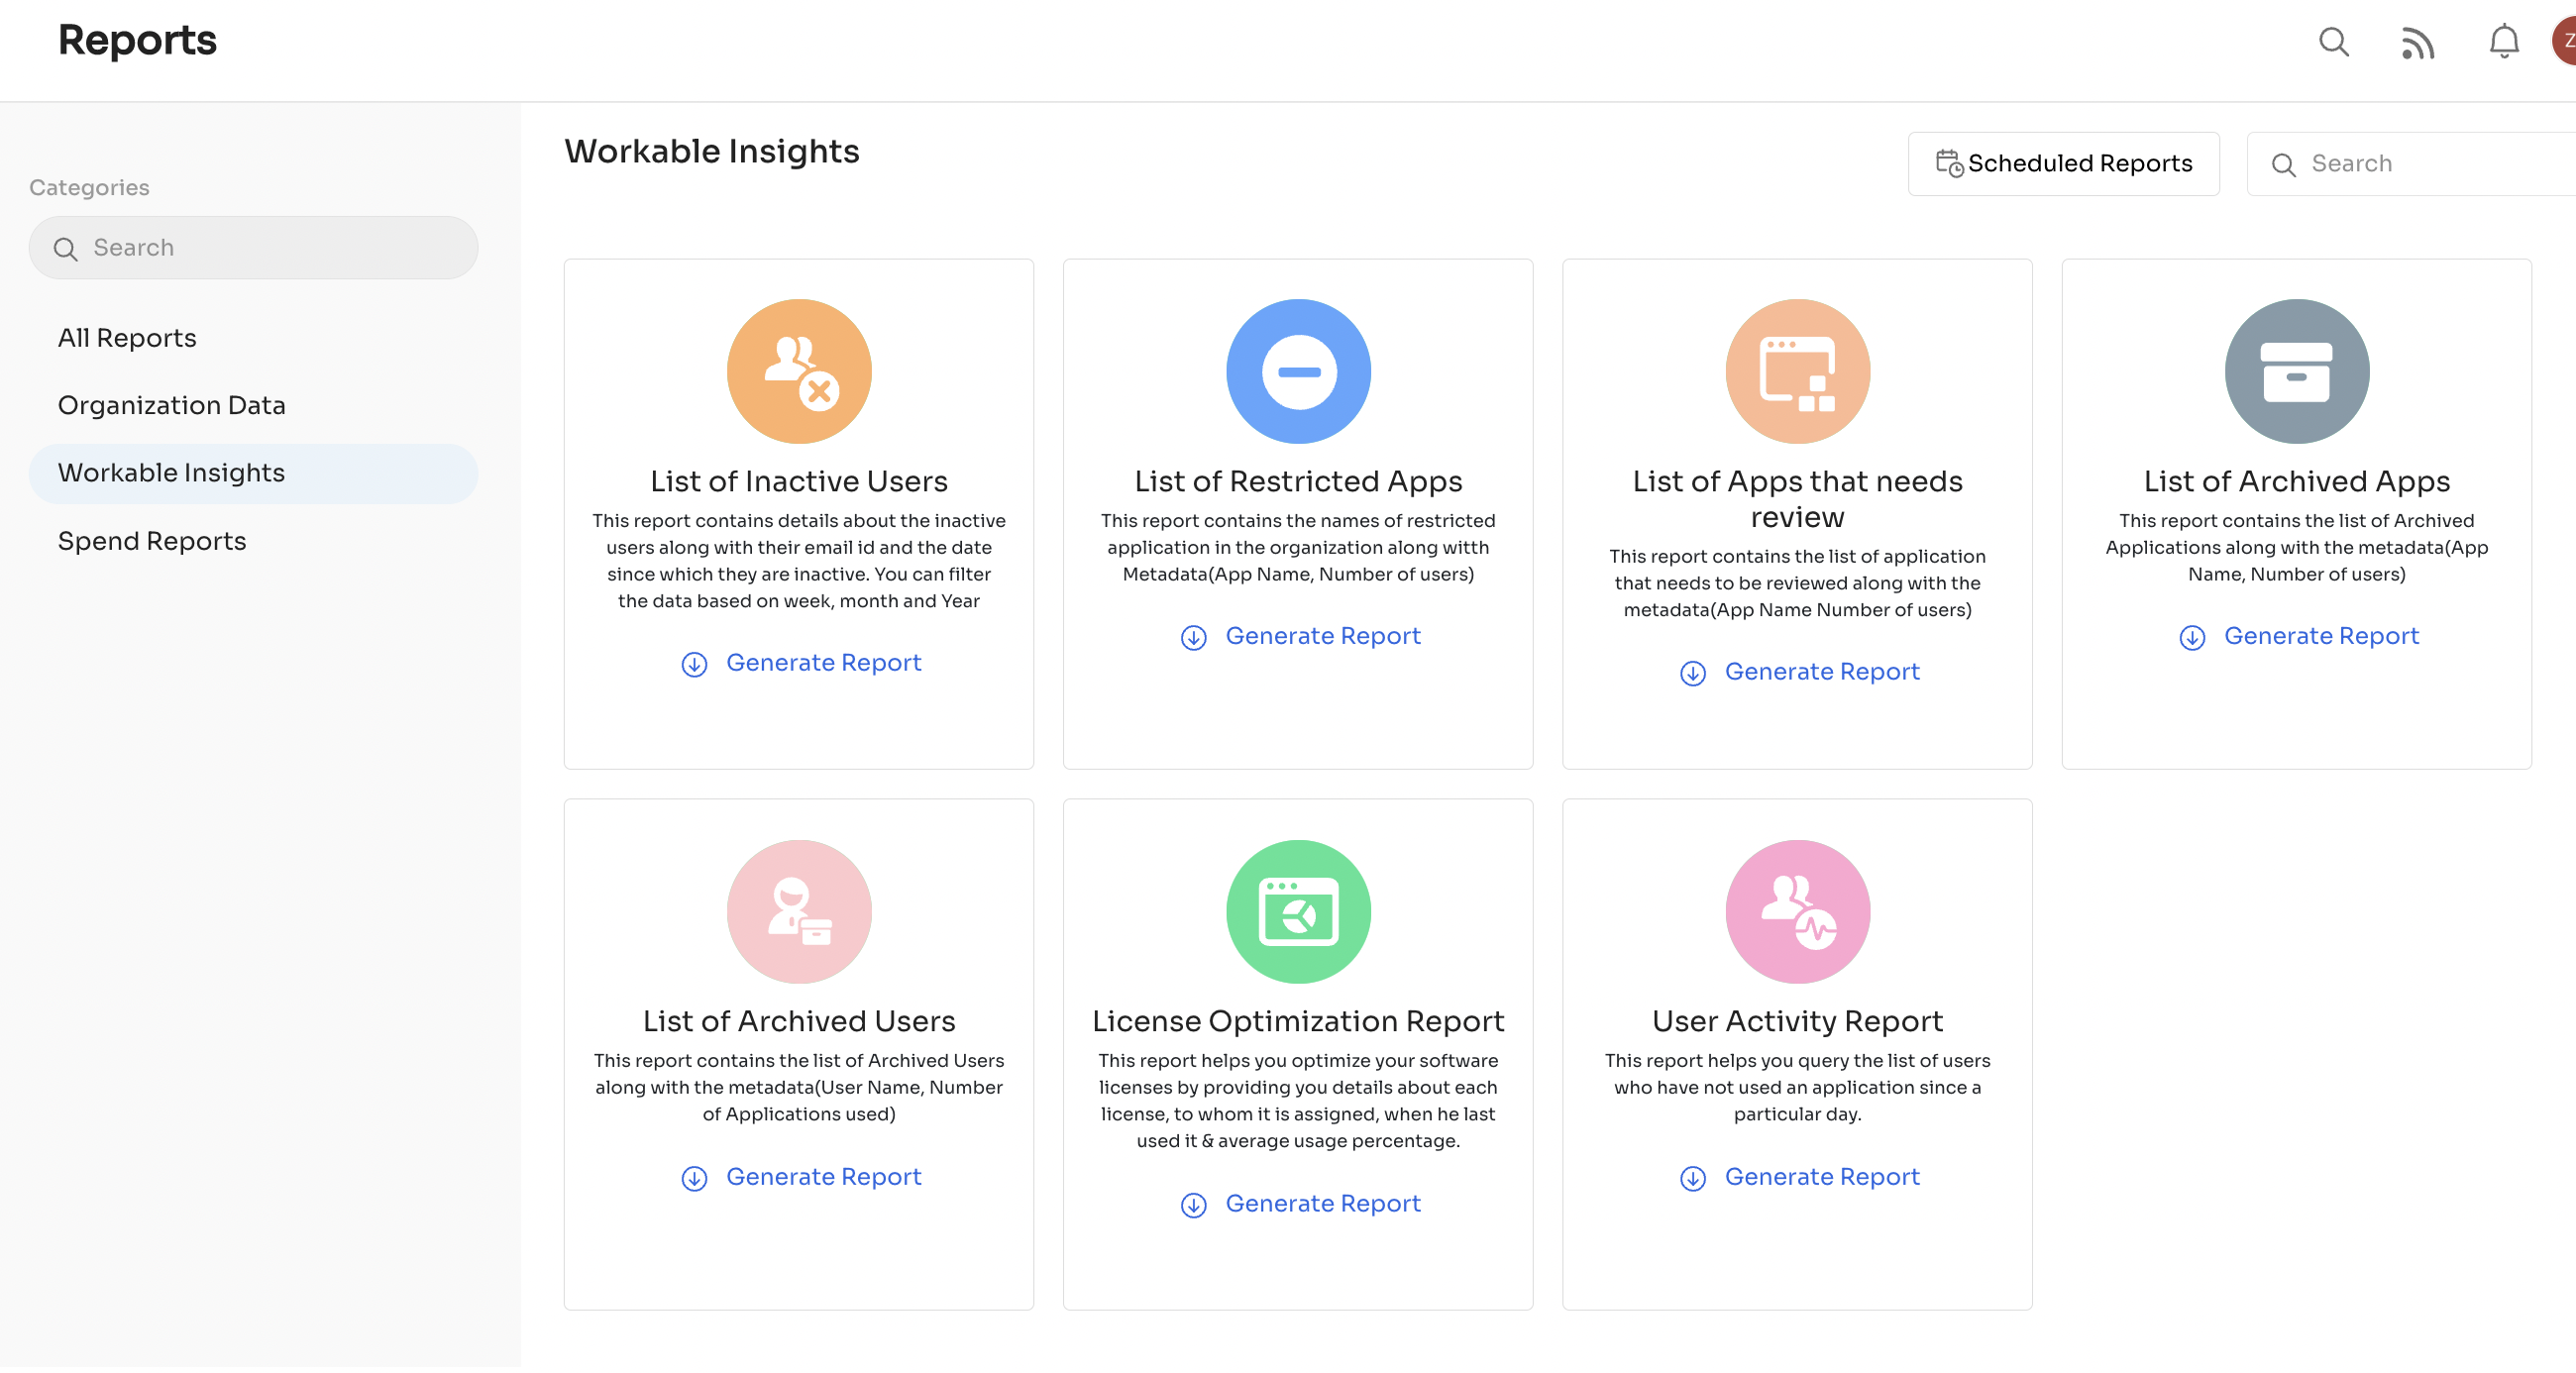 Workable insights report